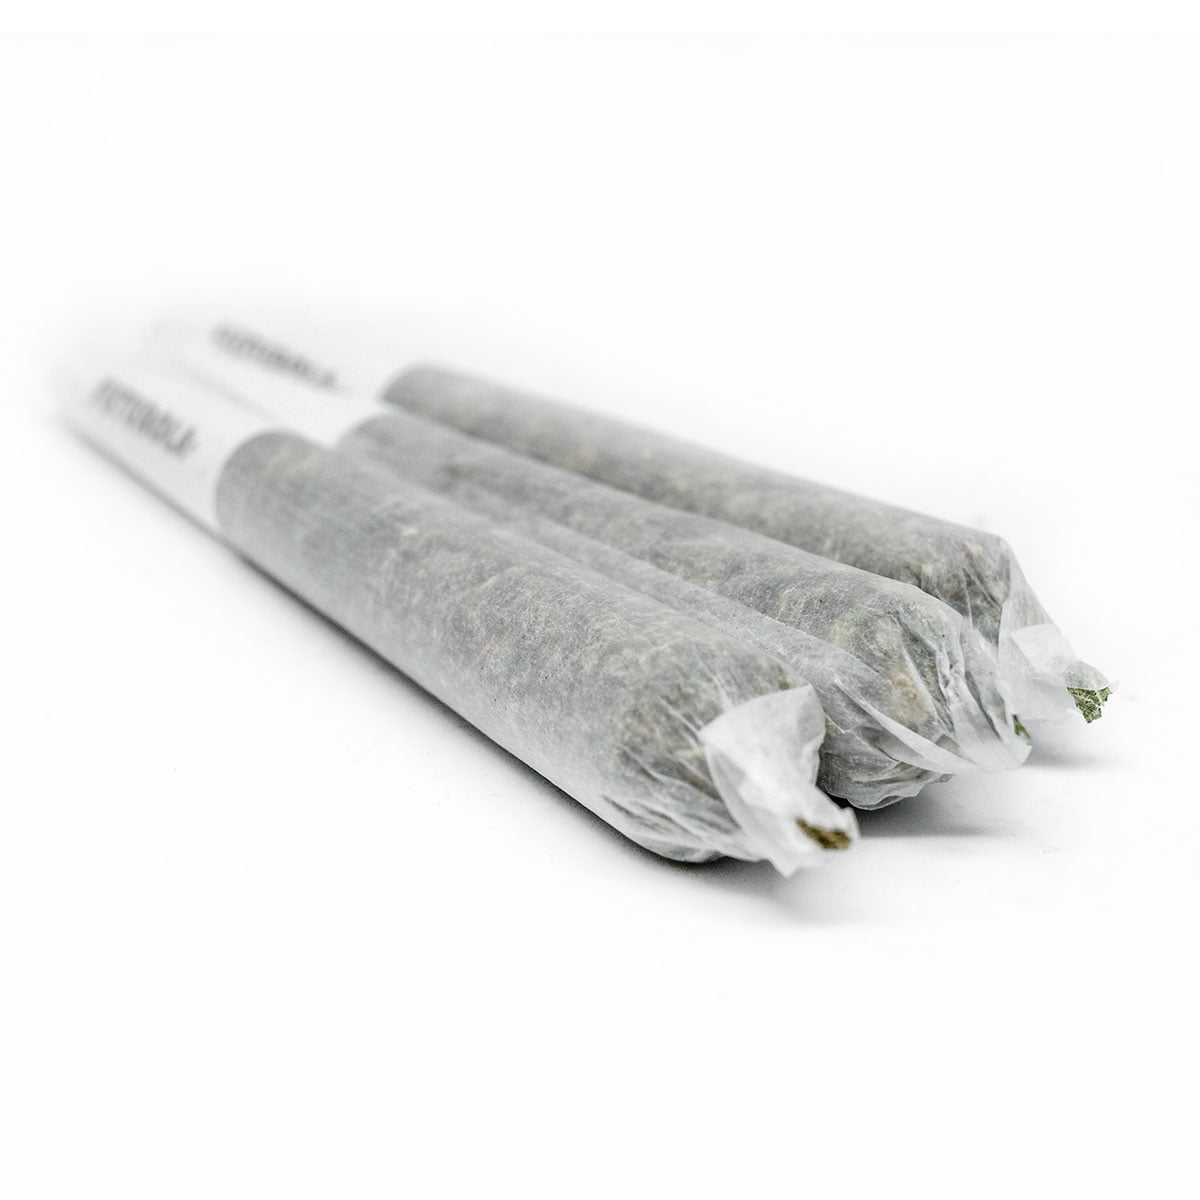 Top notch dispensary offering three bundles of Pre Rolls-10 Regular, carefully wrapped in plastic, showcased on a white surface.